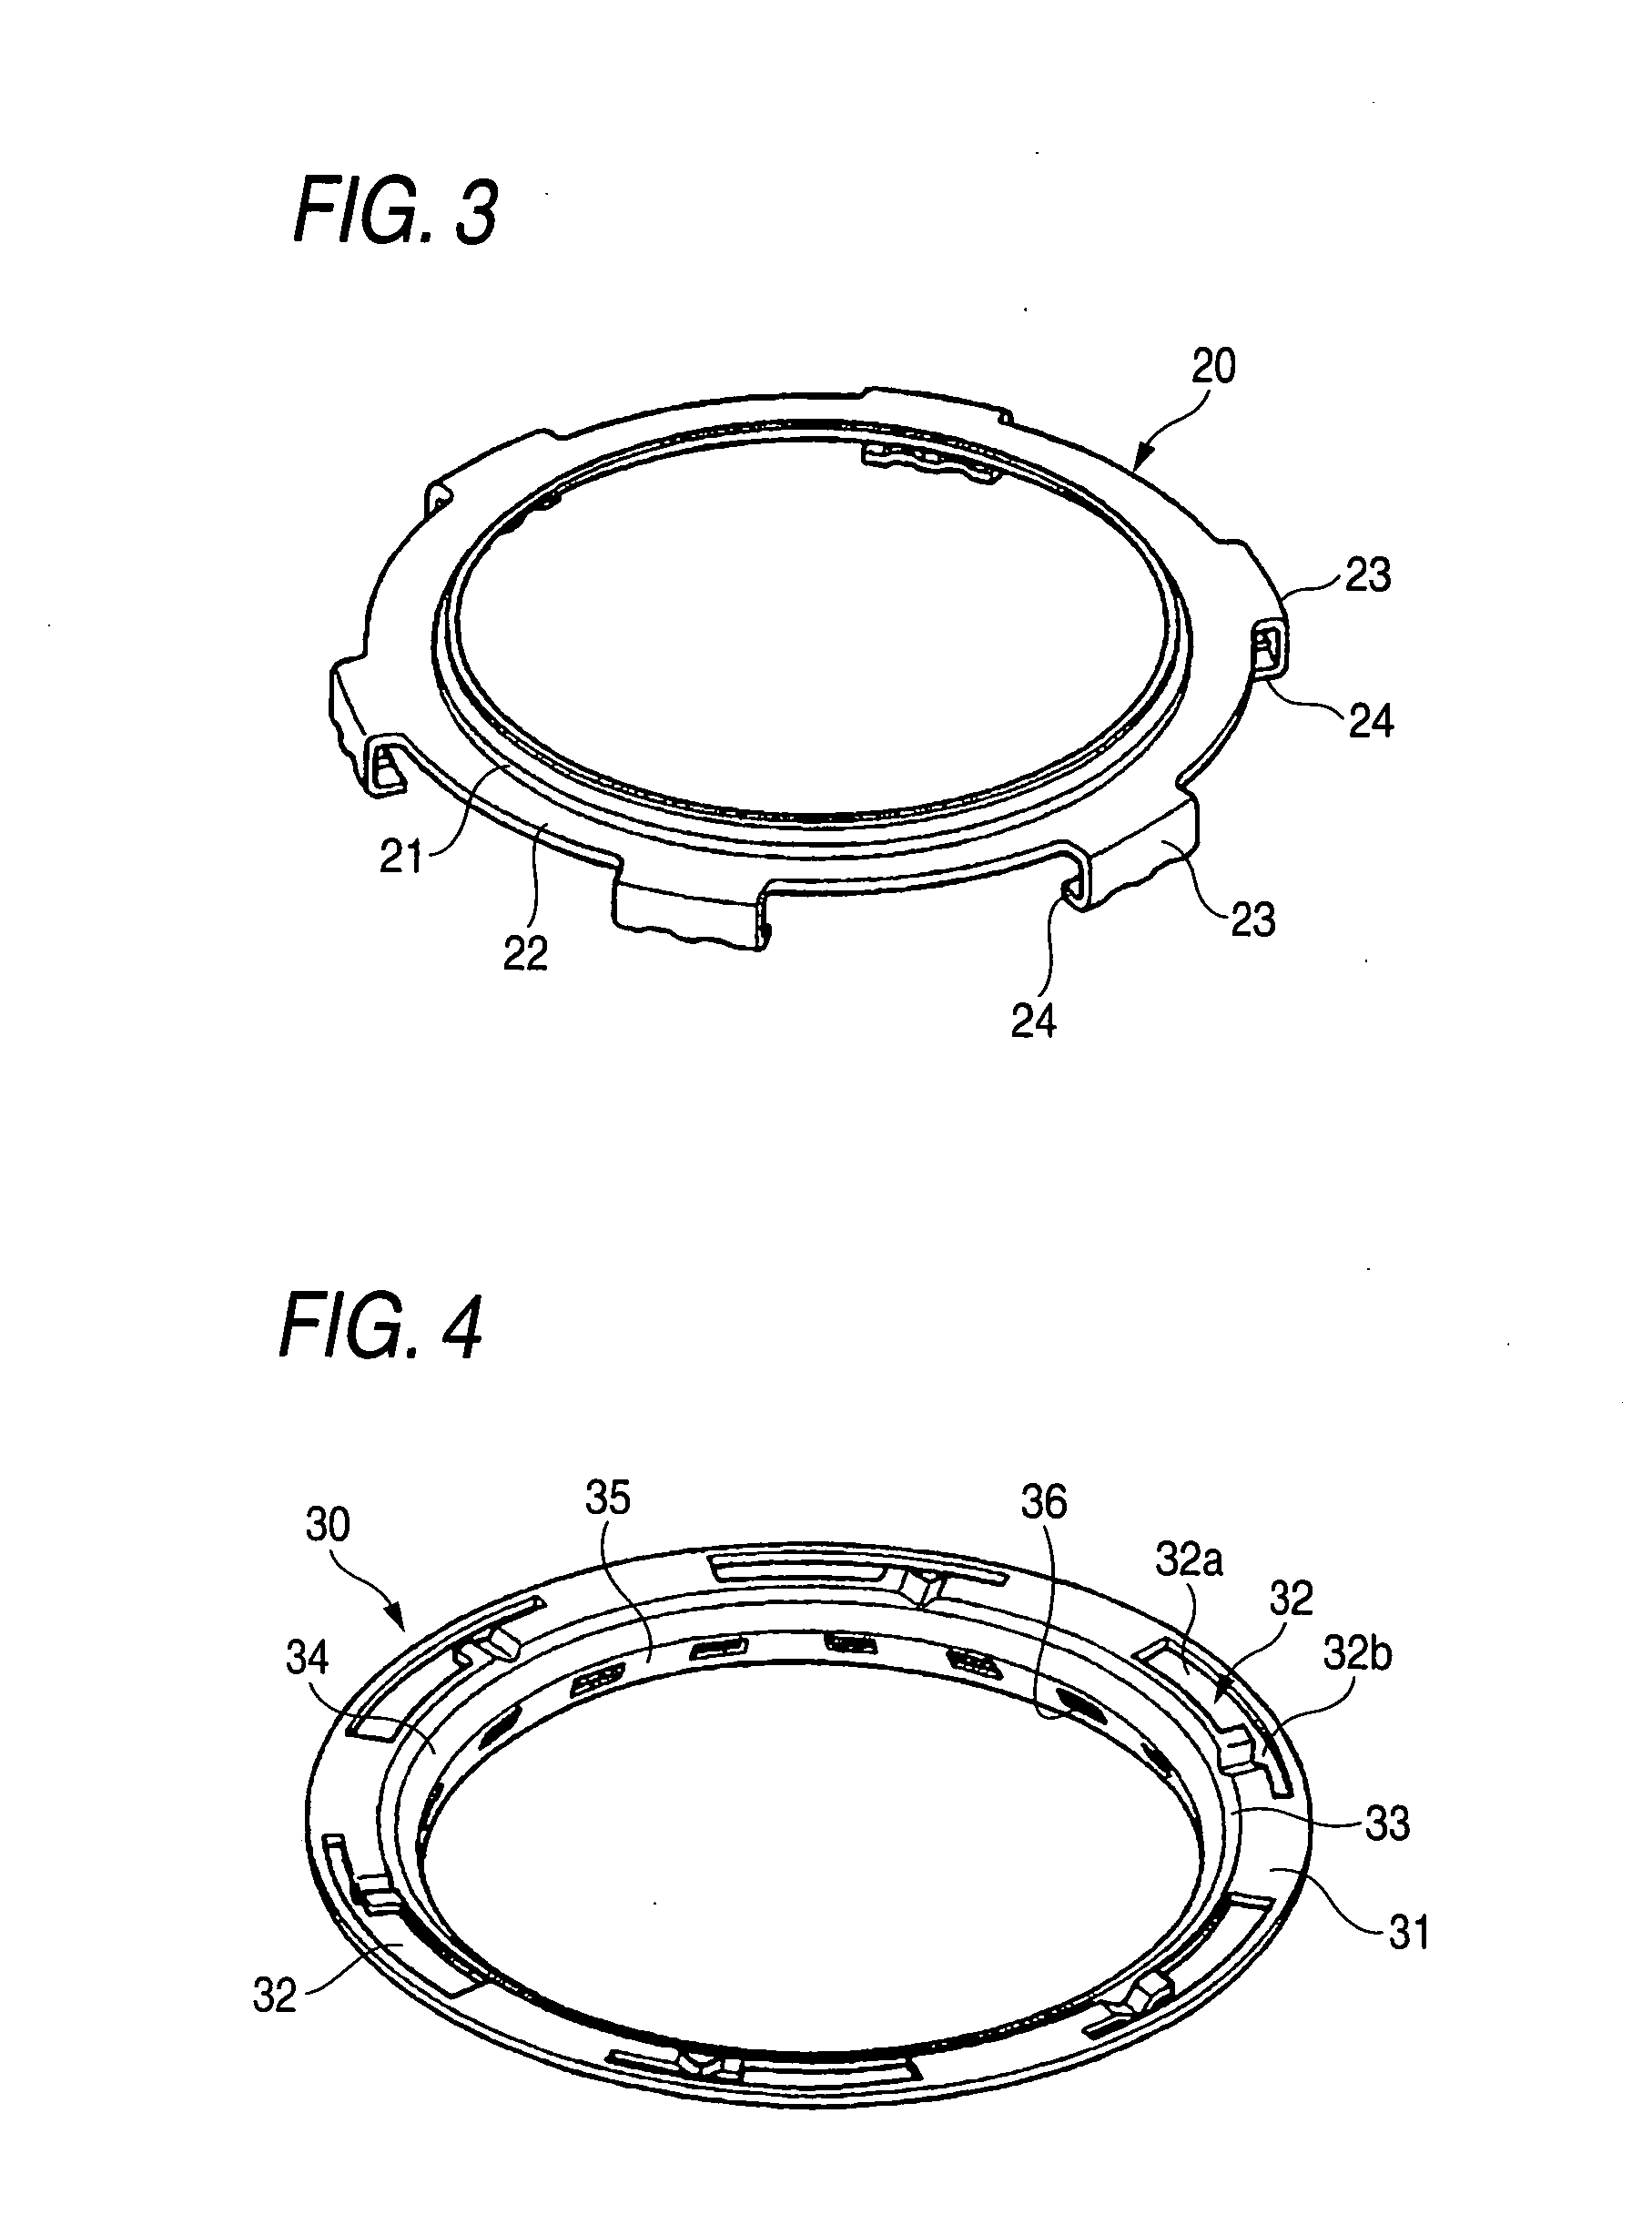 Opening structure of fuel tank and fabricating method thereof